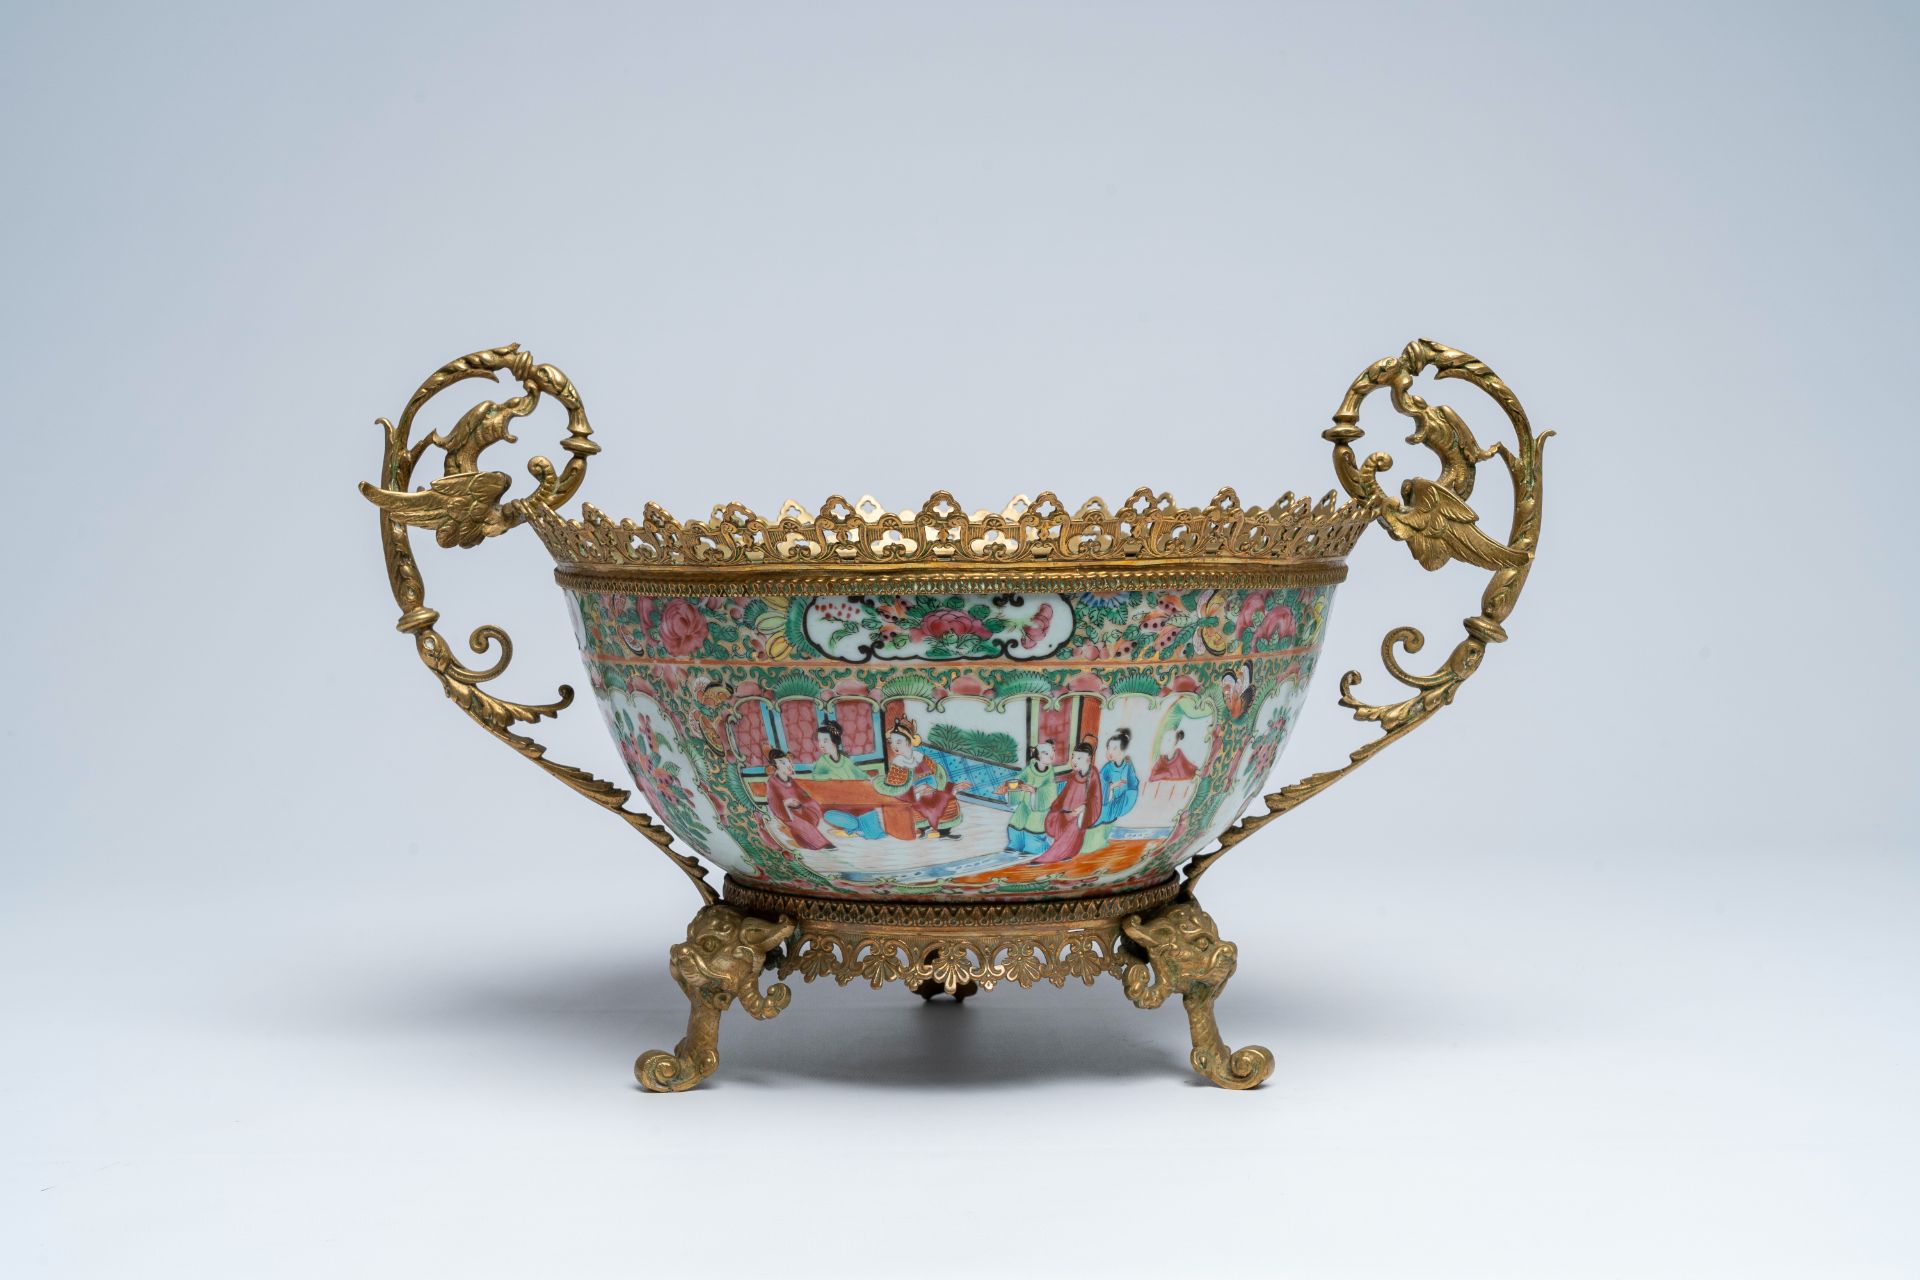 A Chinese Canton famille rose brass mounted bowl with palace scenes and floral design, 19th C. - Image 2 of 7